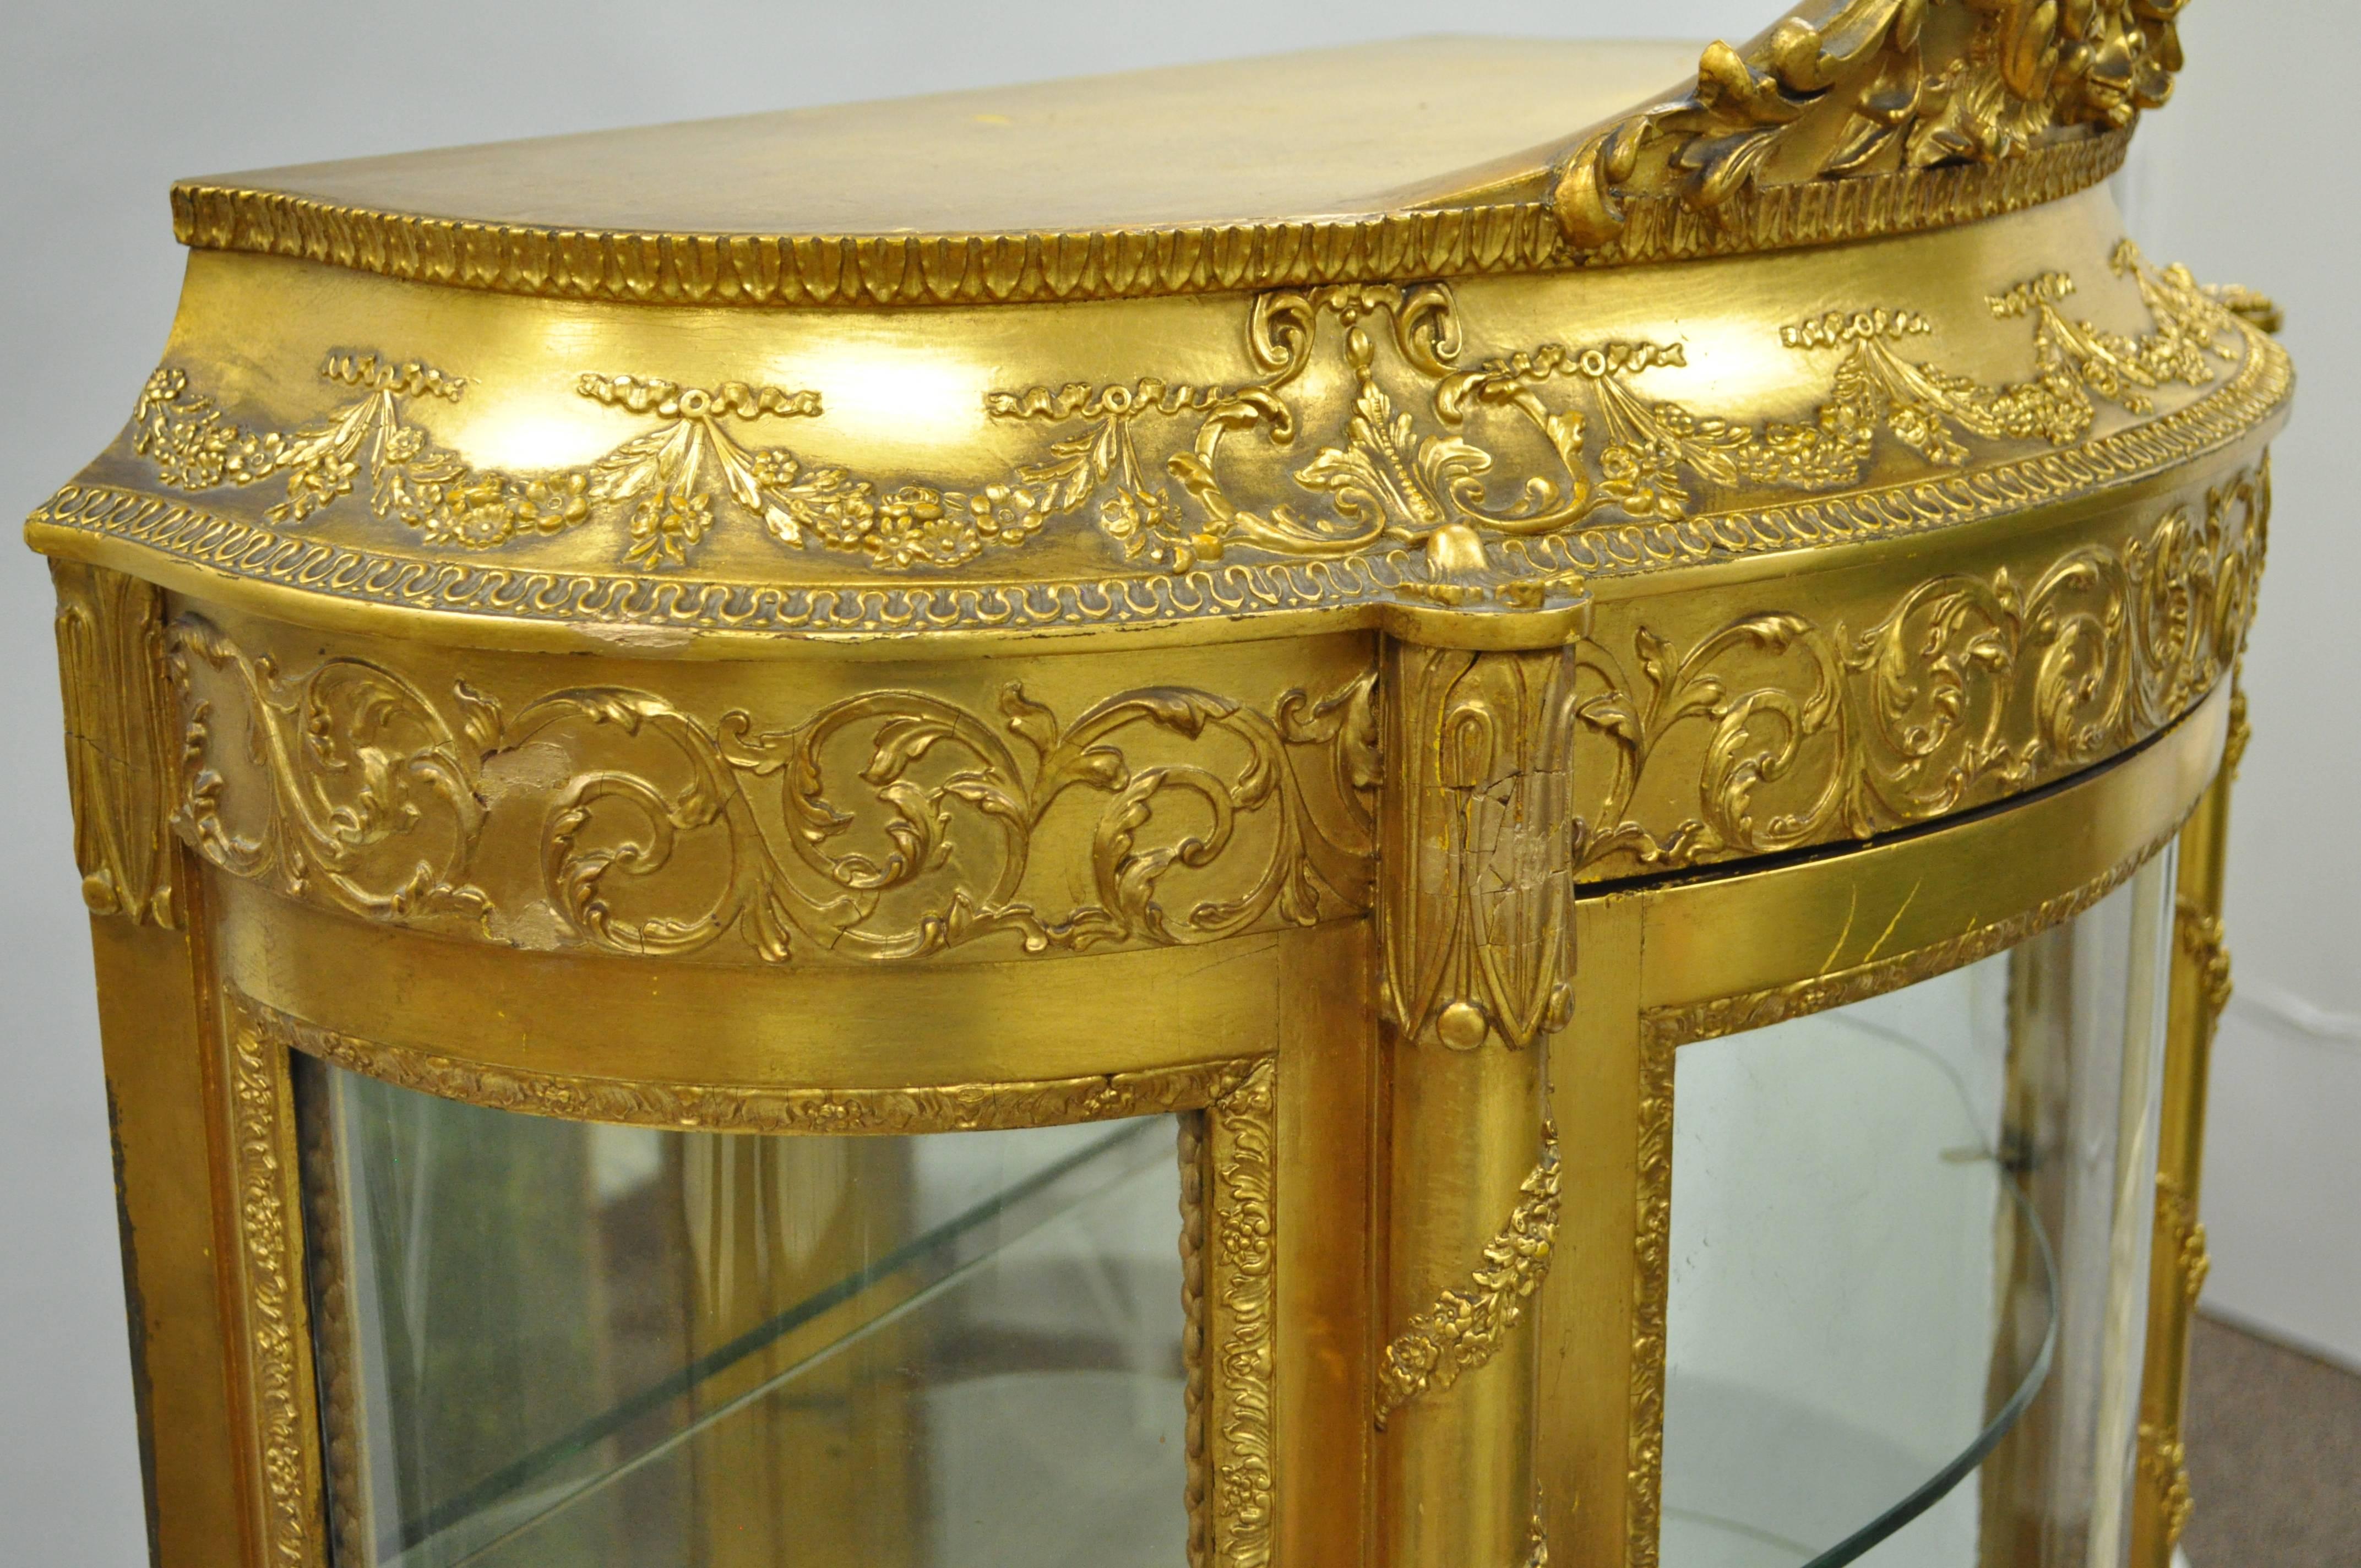 Giltwood French Louis XV Gold Gilt Wood Vernis Martin Curved Glass Vitrine Curio Cabinet